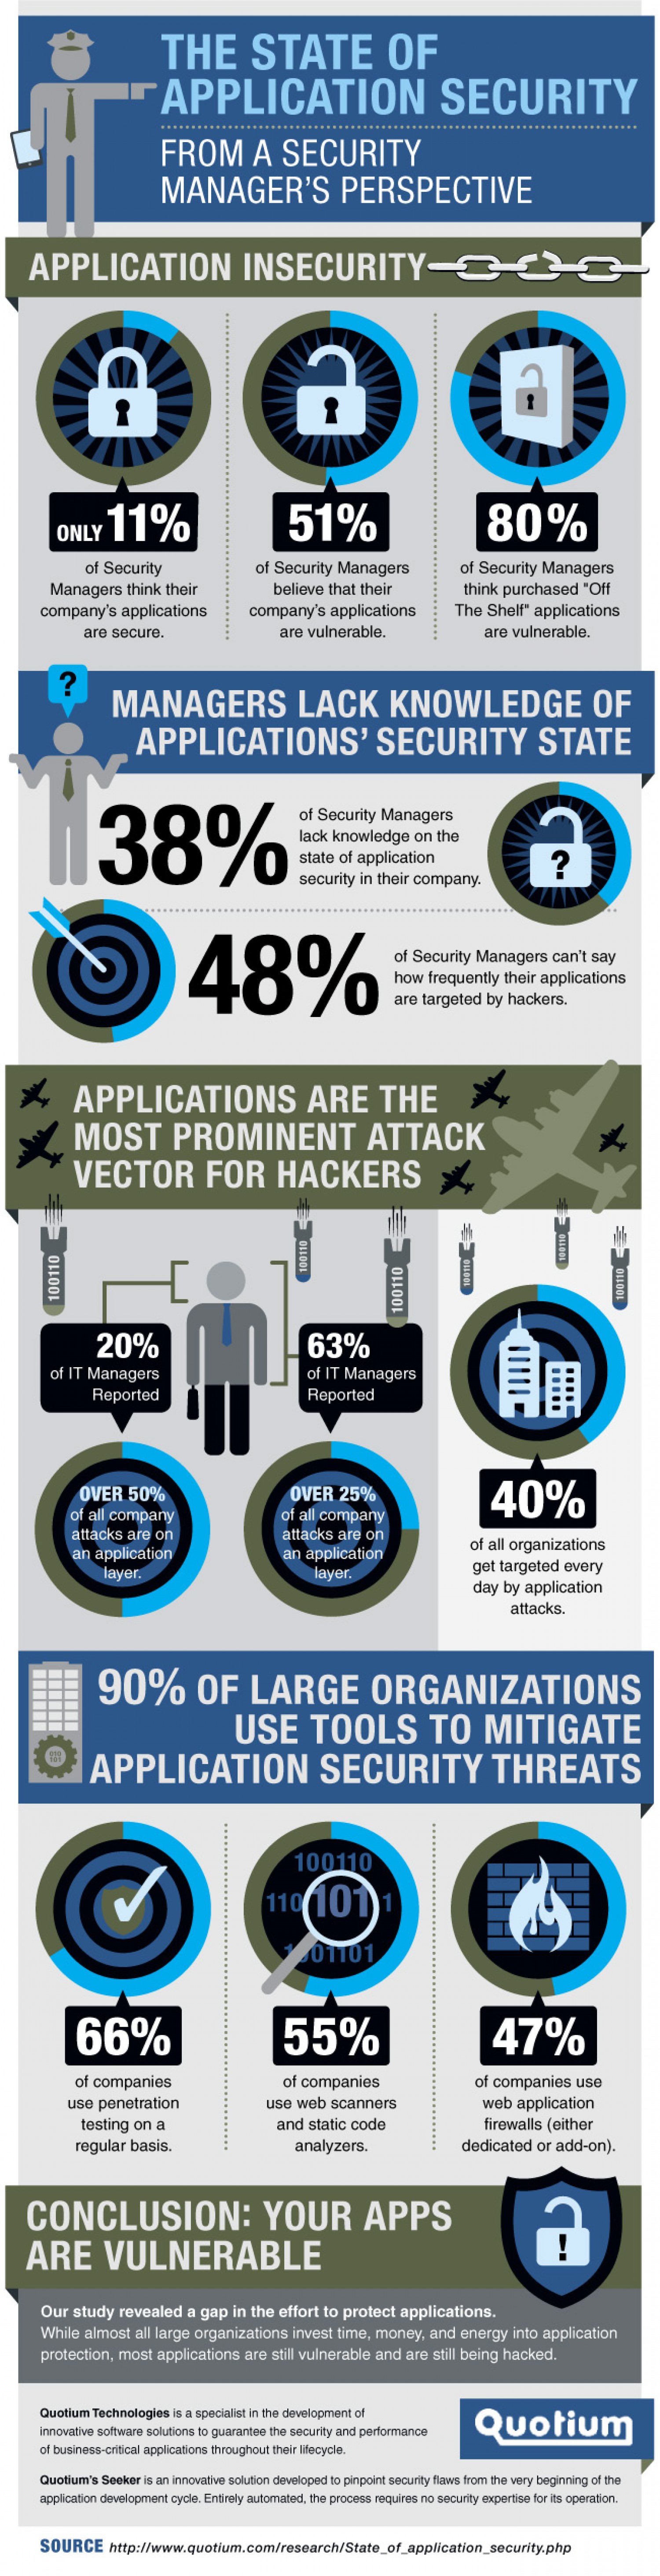 The state of application security